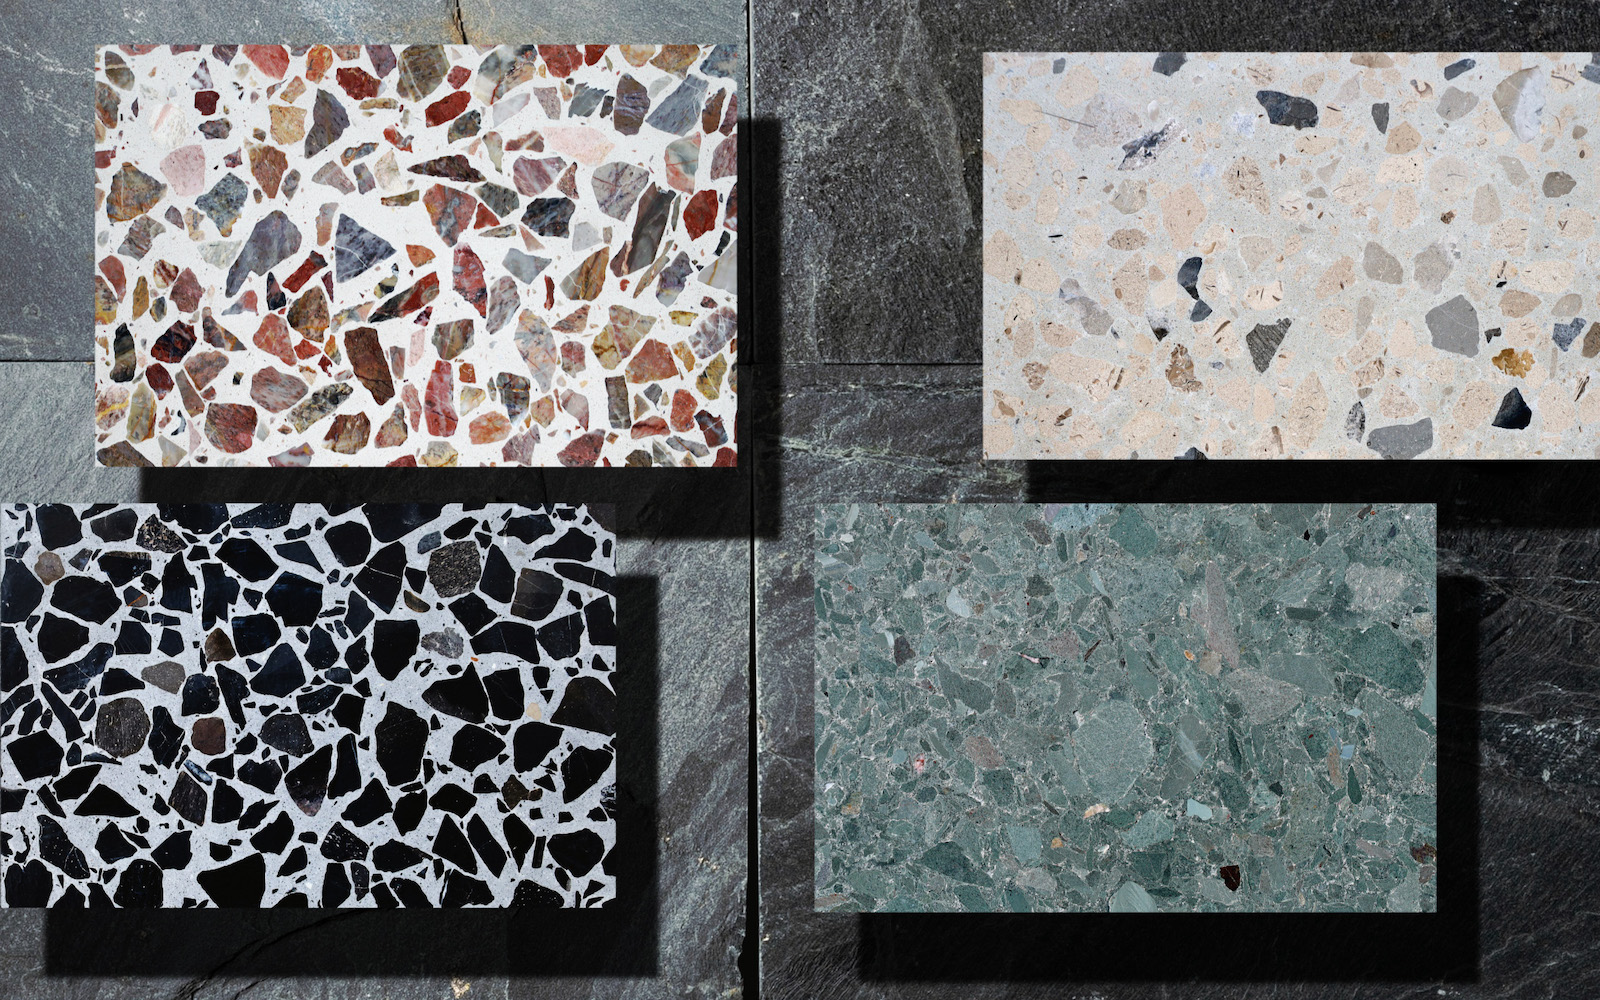 Terrazzo samples from Parkside